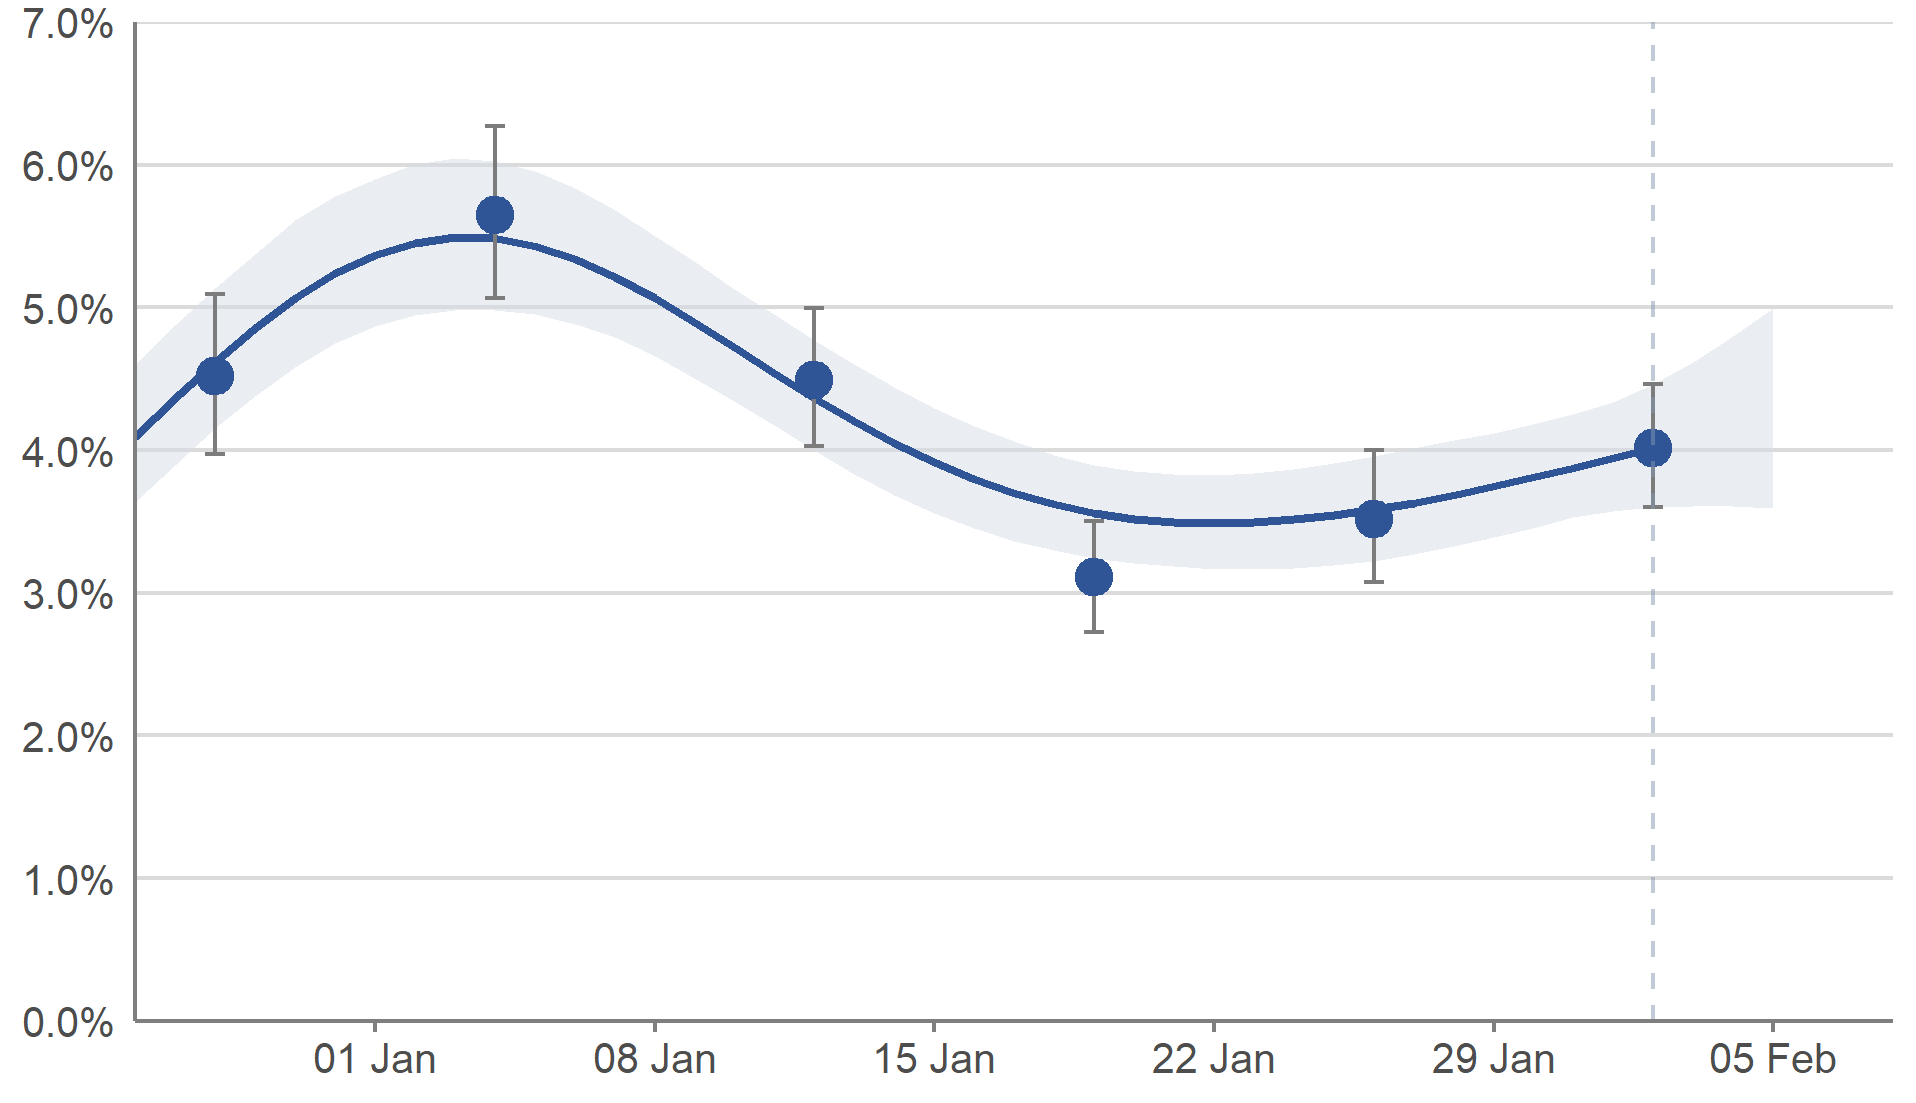 In Scotland, the estimated percentage of people testing positive for COVID-19 peaked on 3 January 2022. After a period of decrease, the estimates have increased again in the most recent week.